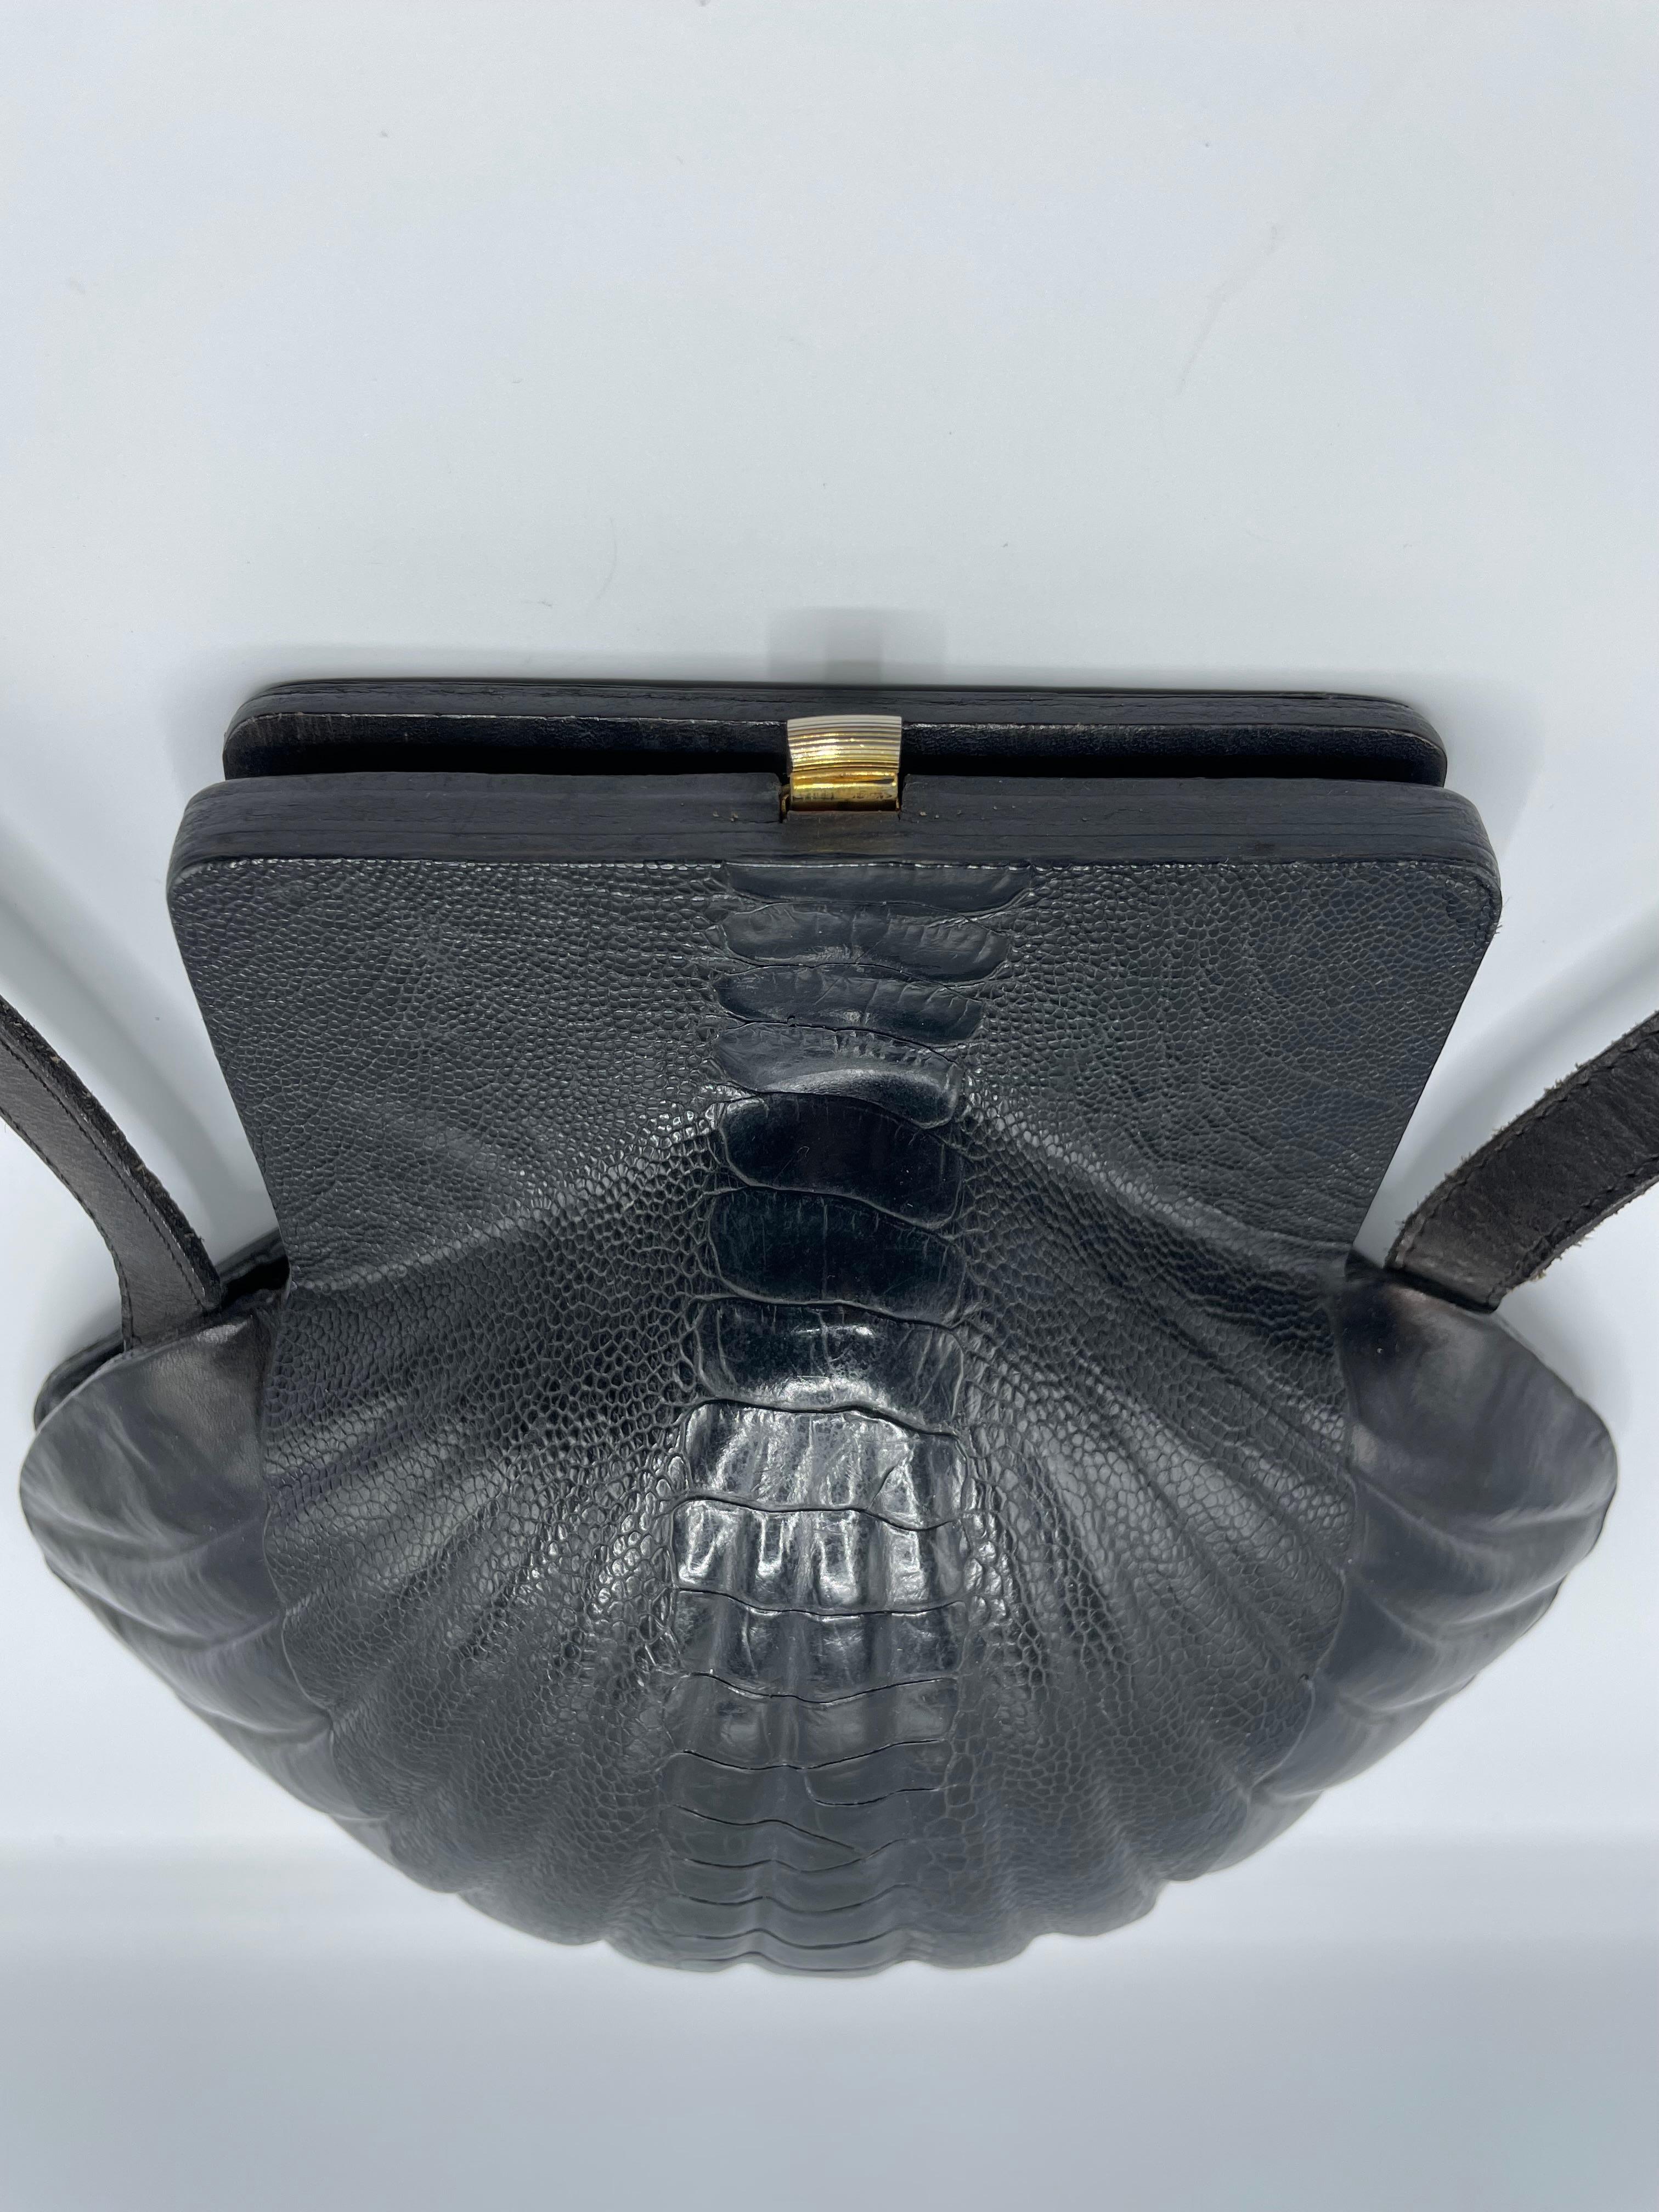 Joaquin Olivier for Tabatà Scallops vintage bag 1960 In Good Condition For Sale In Palm Beach, FL